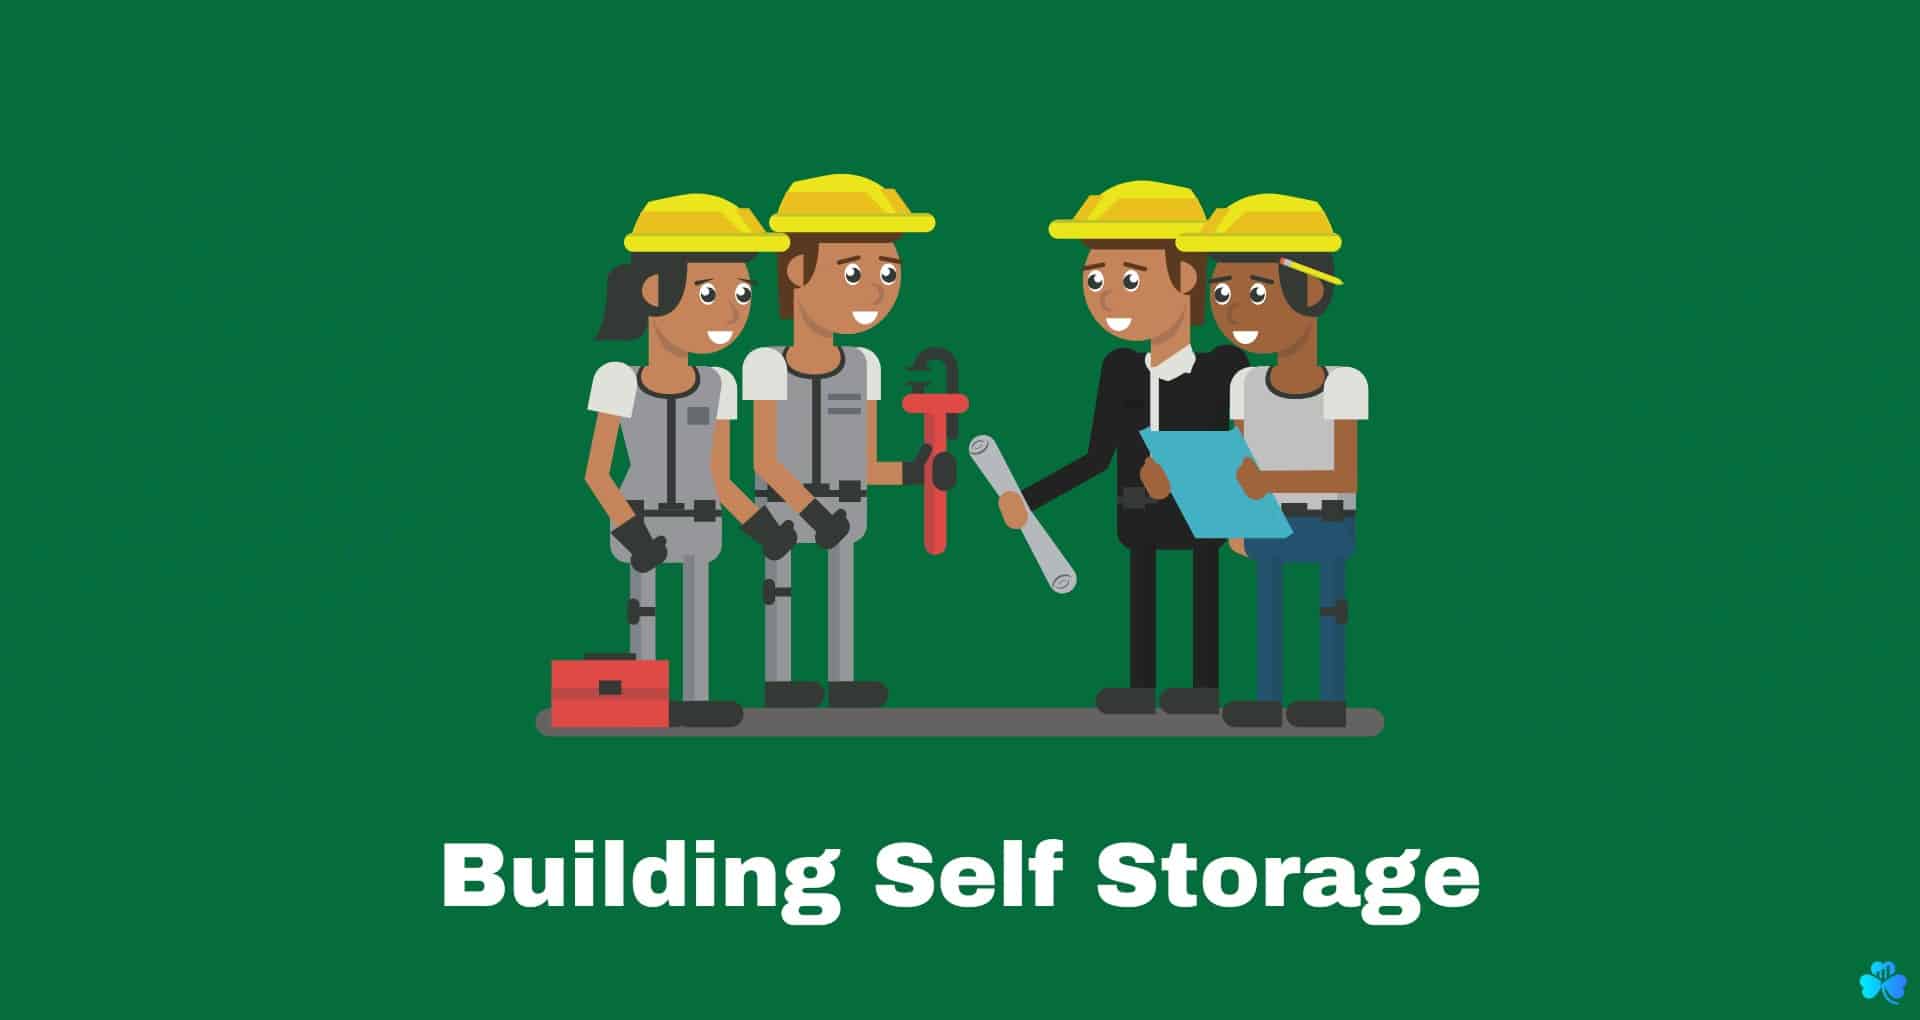 build self storage- builders talking wearing yellow hats on green background